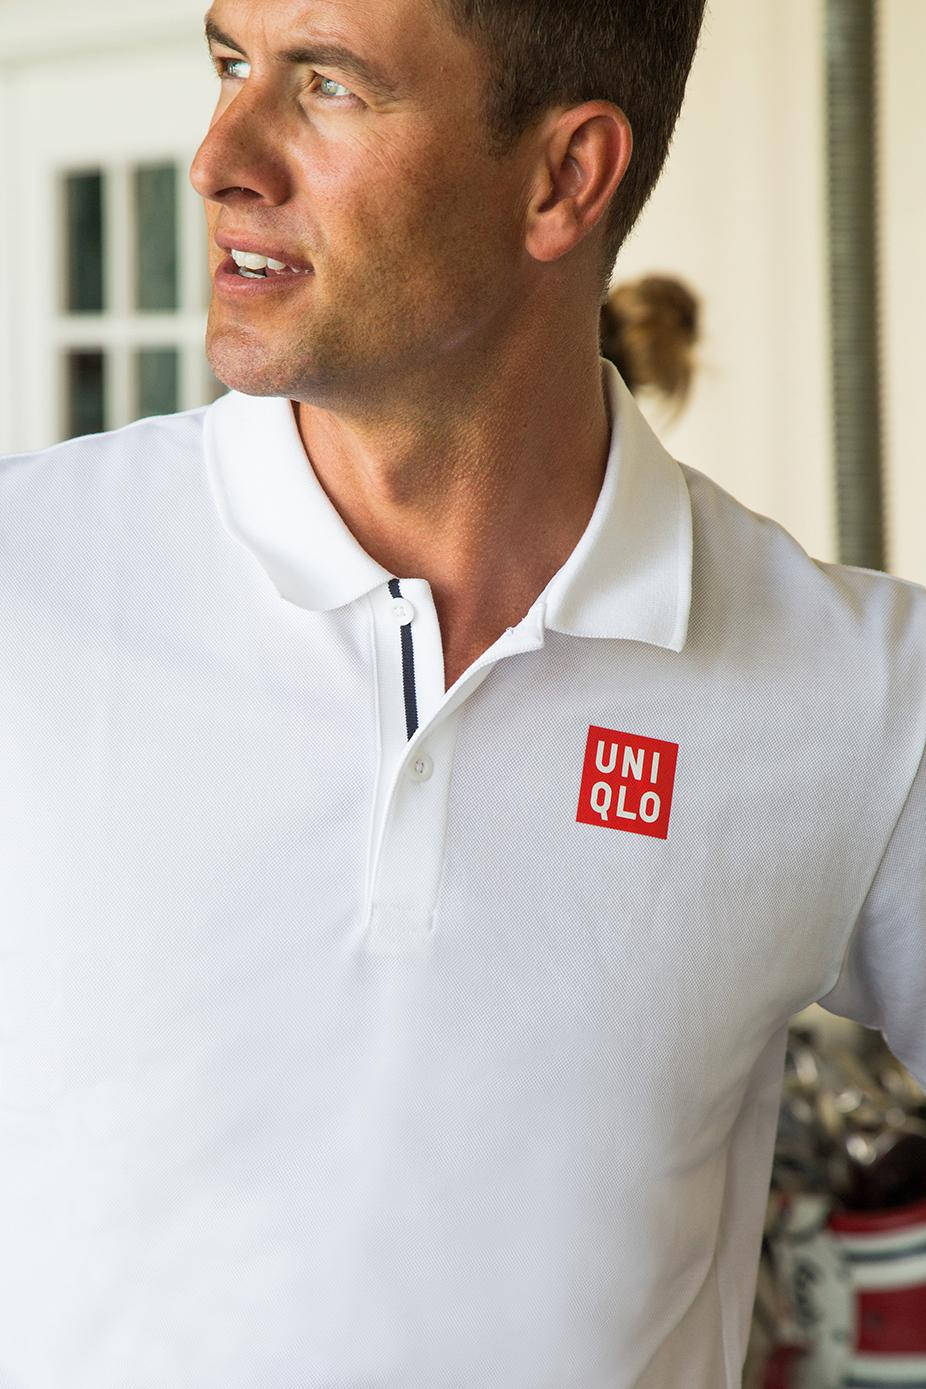 Uniqlo x Adam Scott Golf Clothing Review  The Best Low Budget Golf  Clothing  YouTube